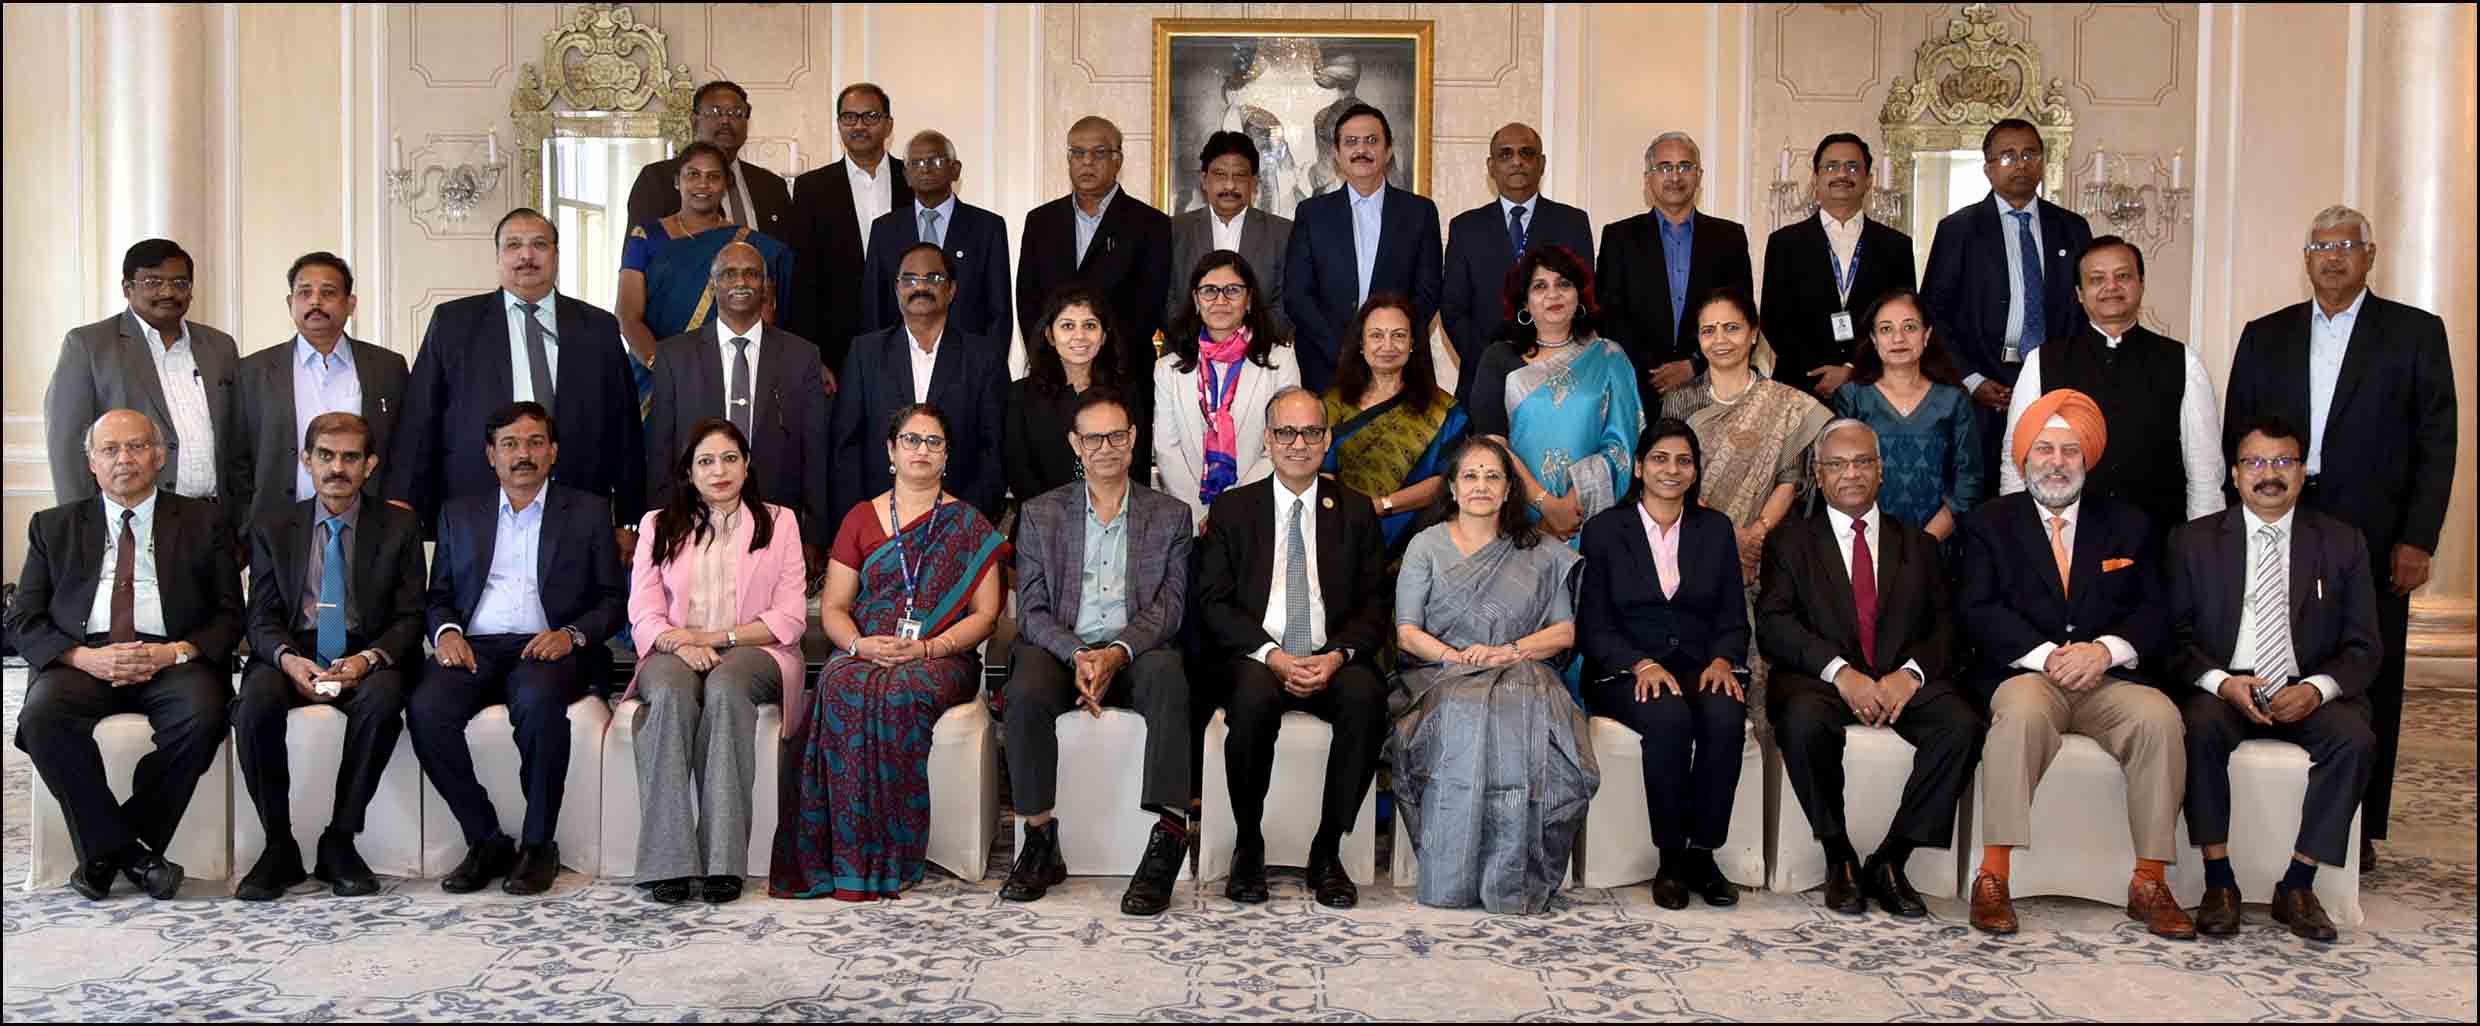 Photos at Program on Governance and Assurance for Directors on Board of Banks, FIs and NBFCs